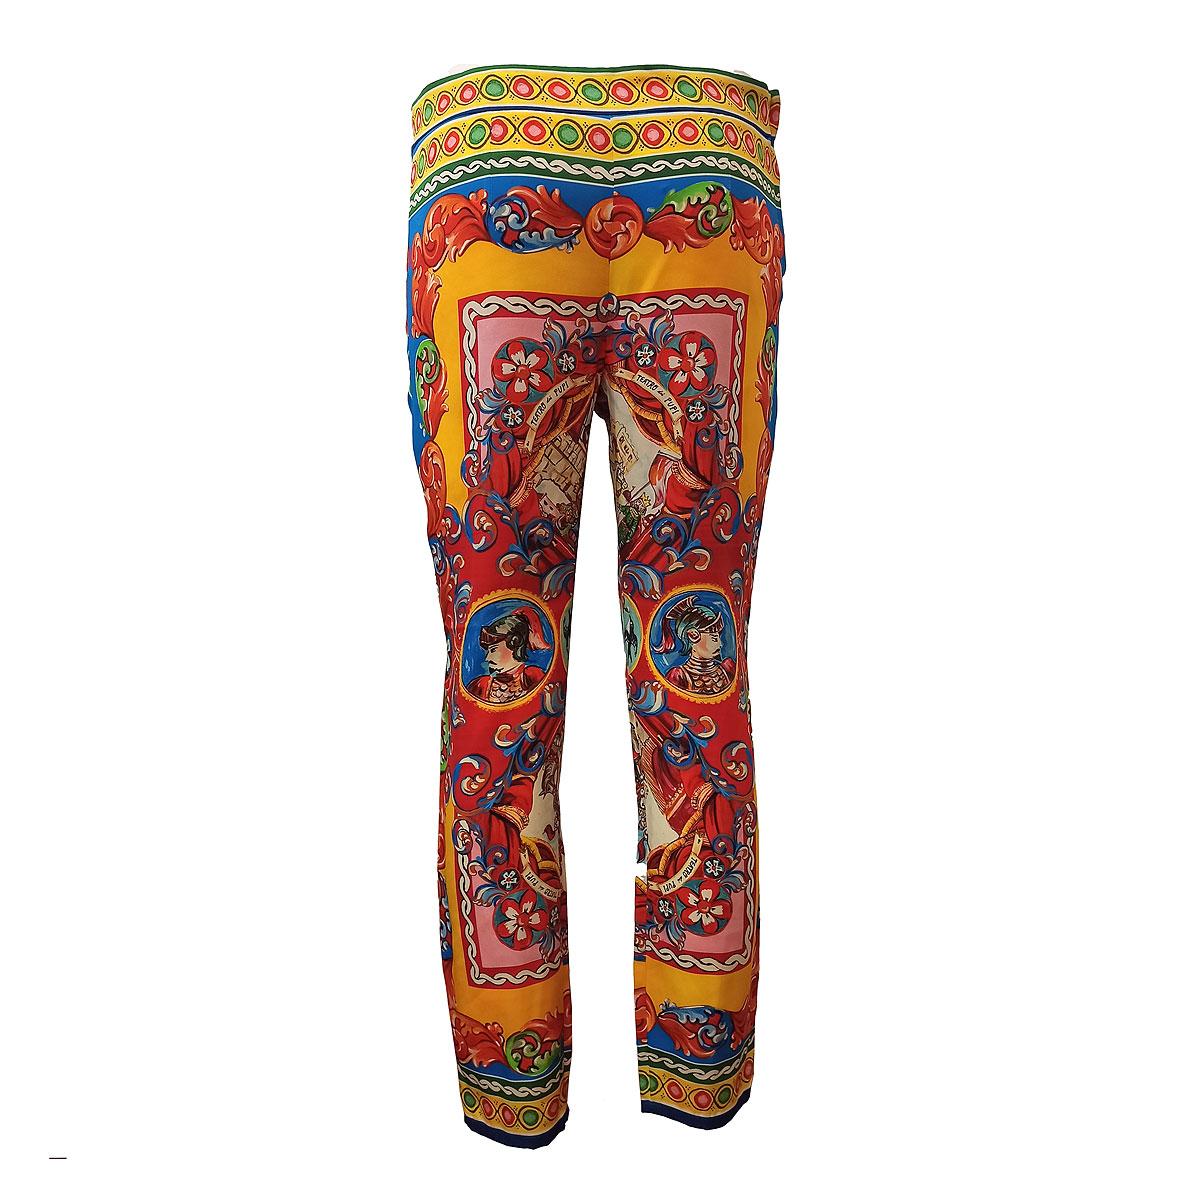 Fantastic and iconic pants by Dolce & Gabbana
Silk
